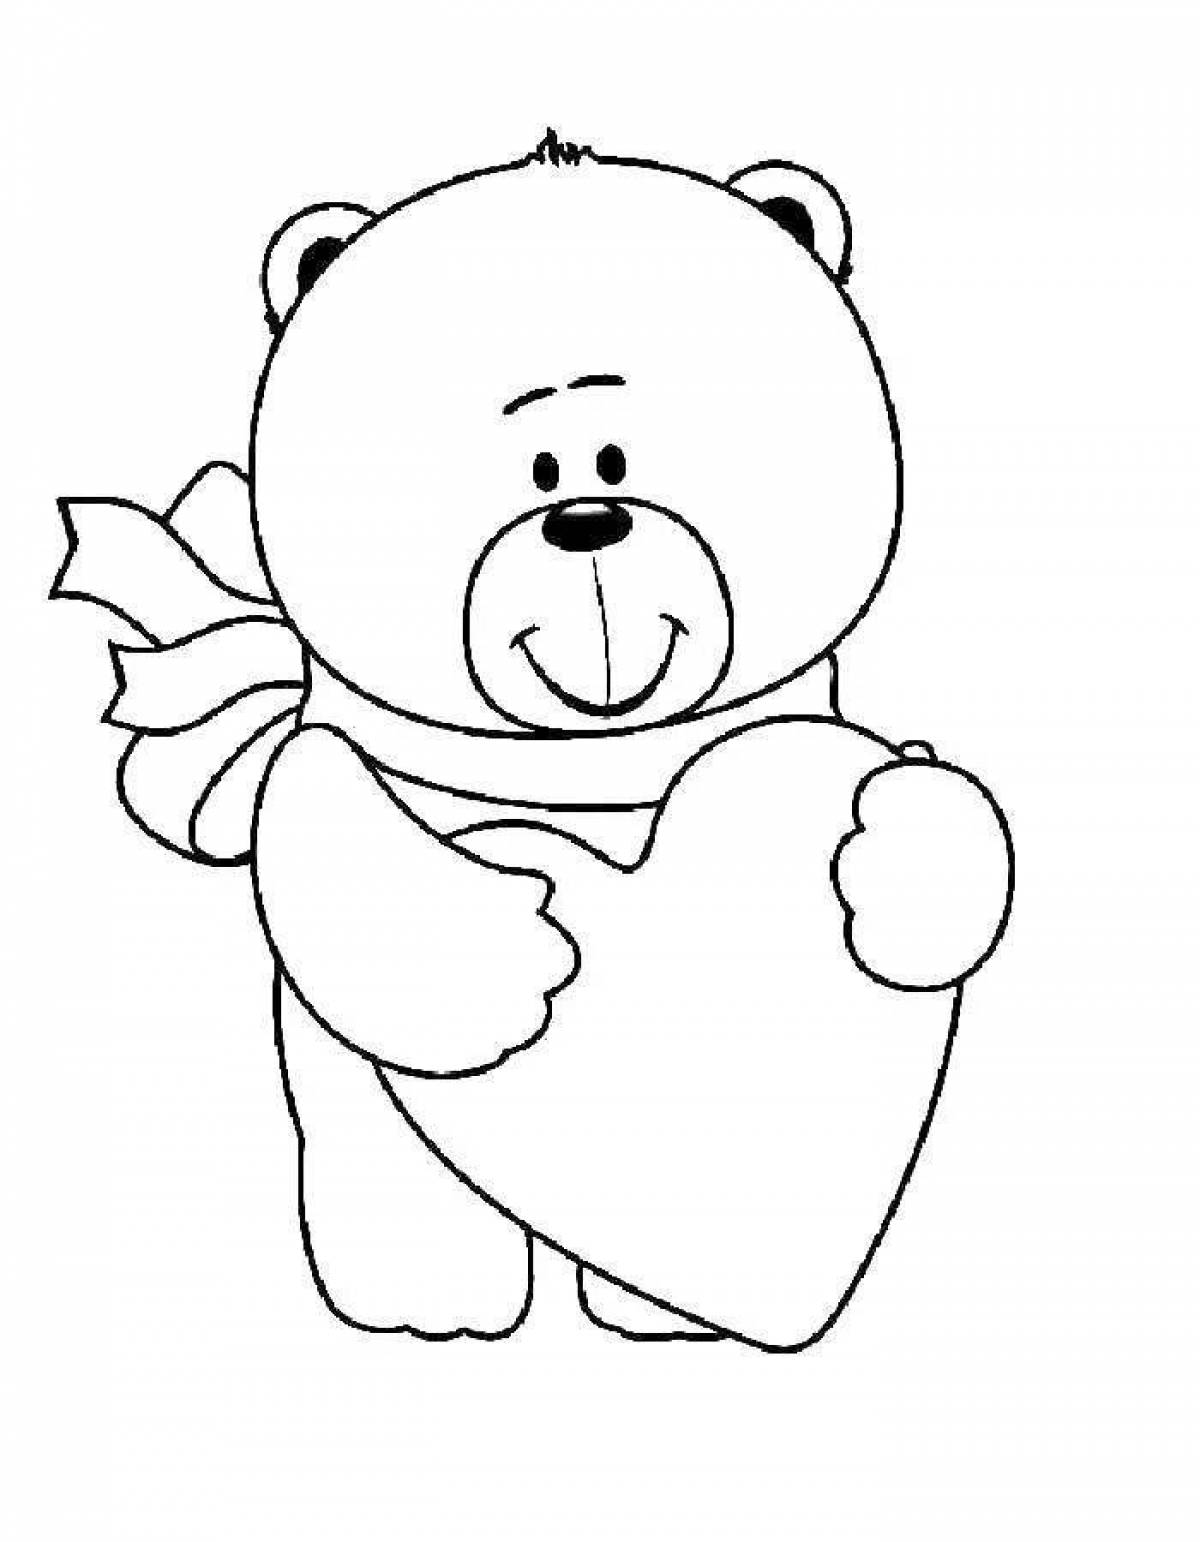 Coloring glowing teddy bear with a heart